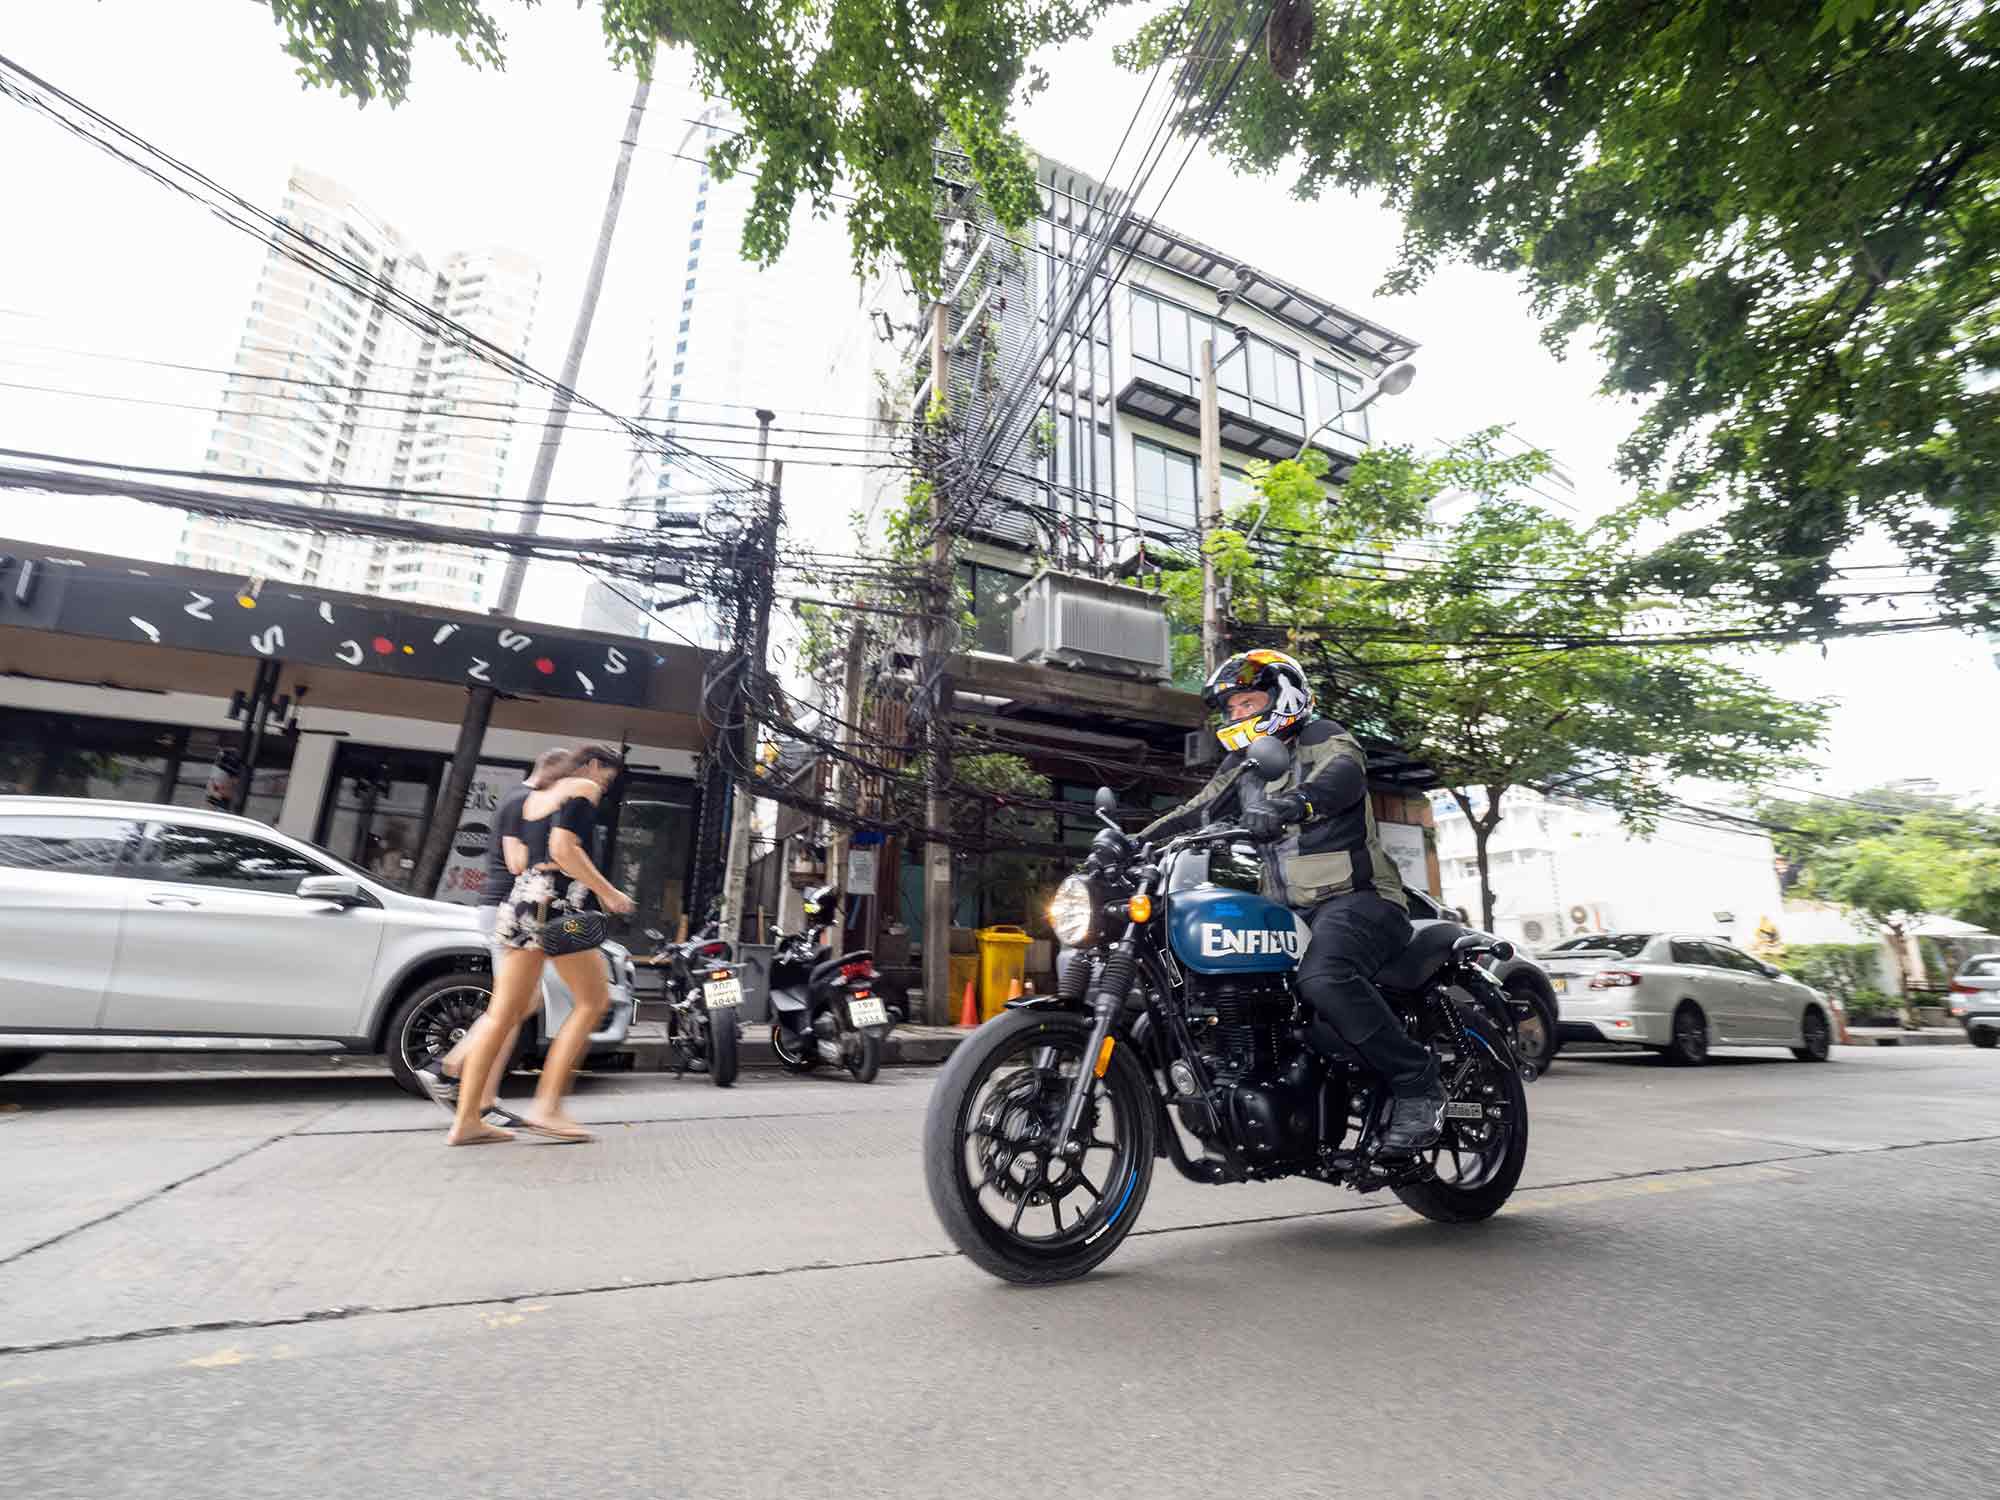 We visited Bangkok to see if the new Hunter 350 could cut it in one of the busiest and most congested cities in the world.